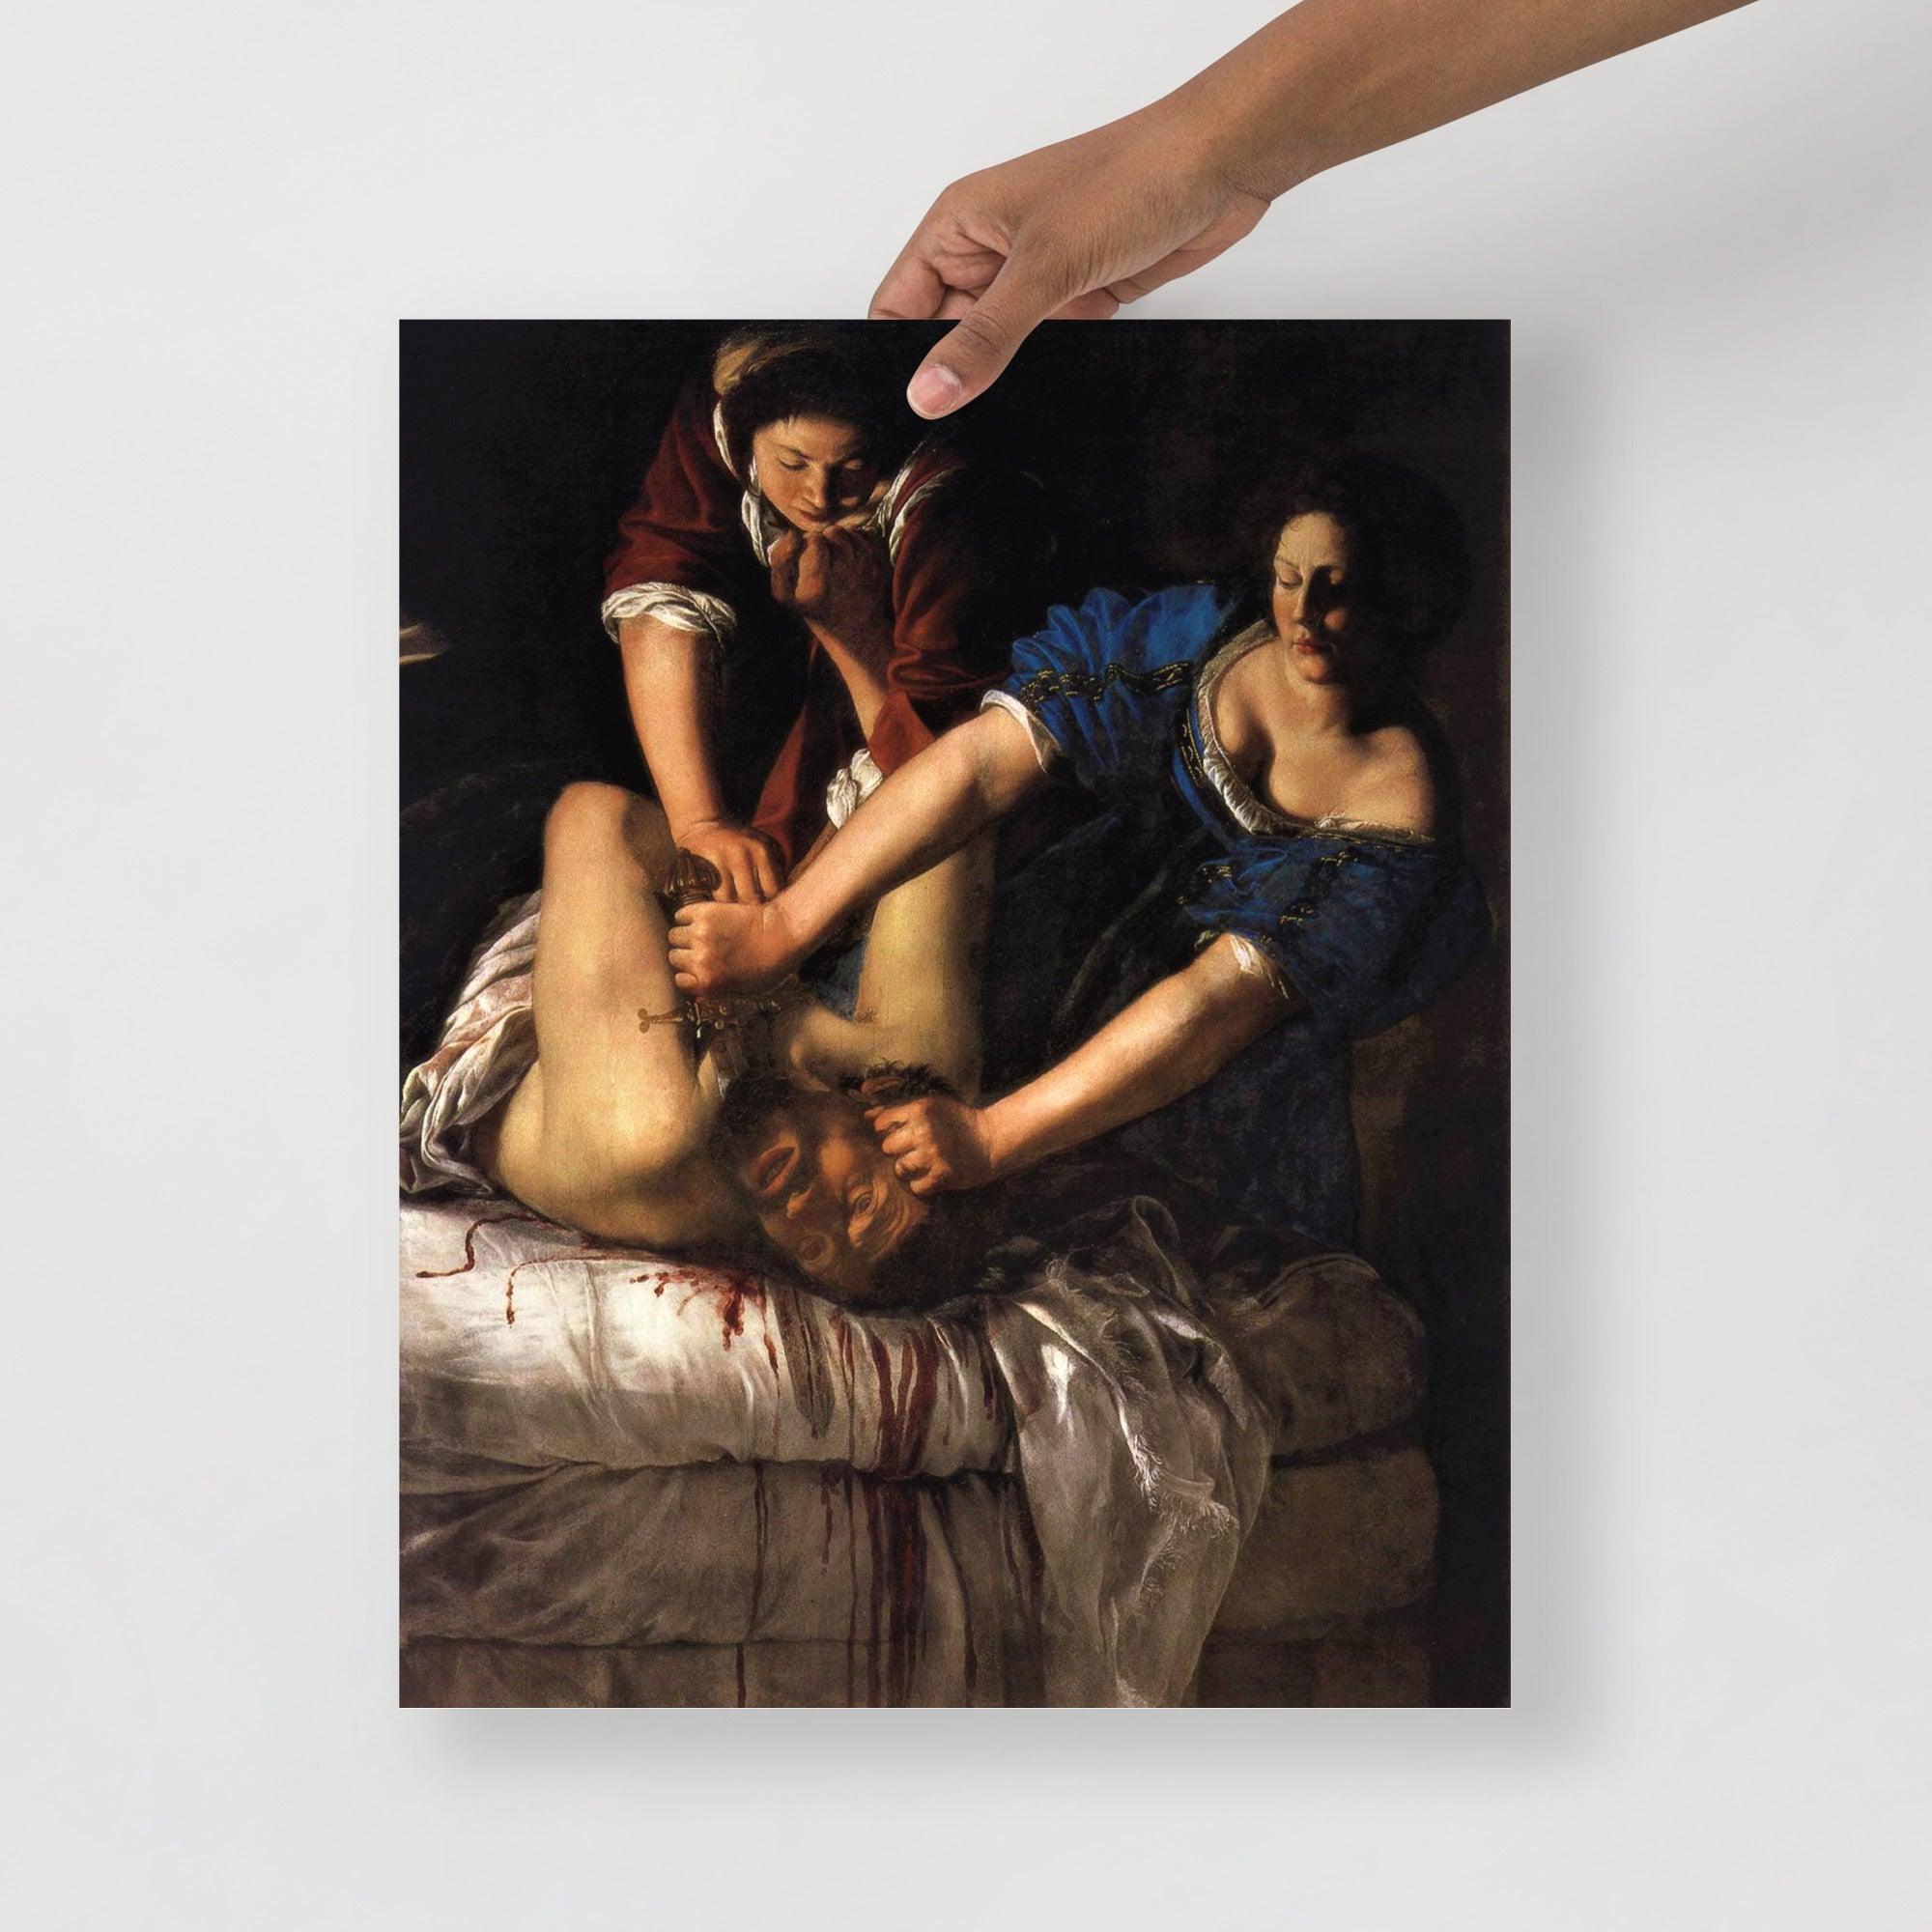 A Judith beheading Holofernes by Artemisia Gentileschi poster on a plain backdrop in size 16x20”.